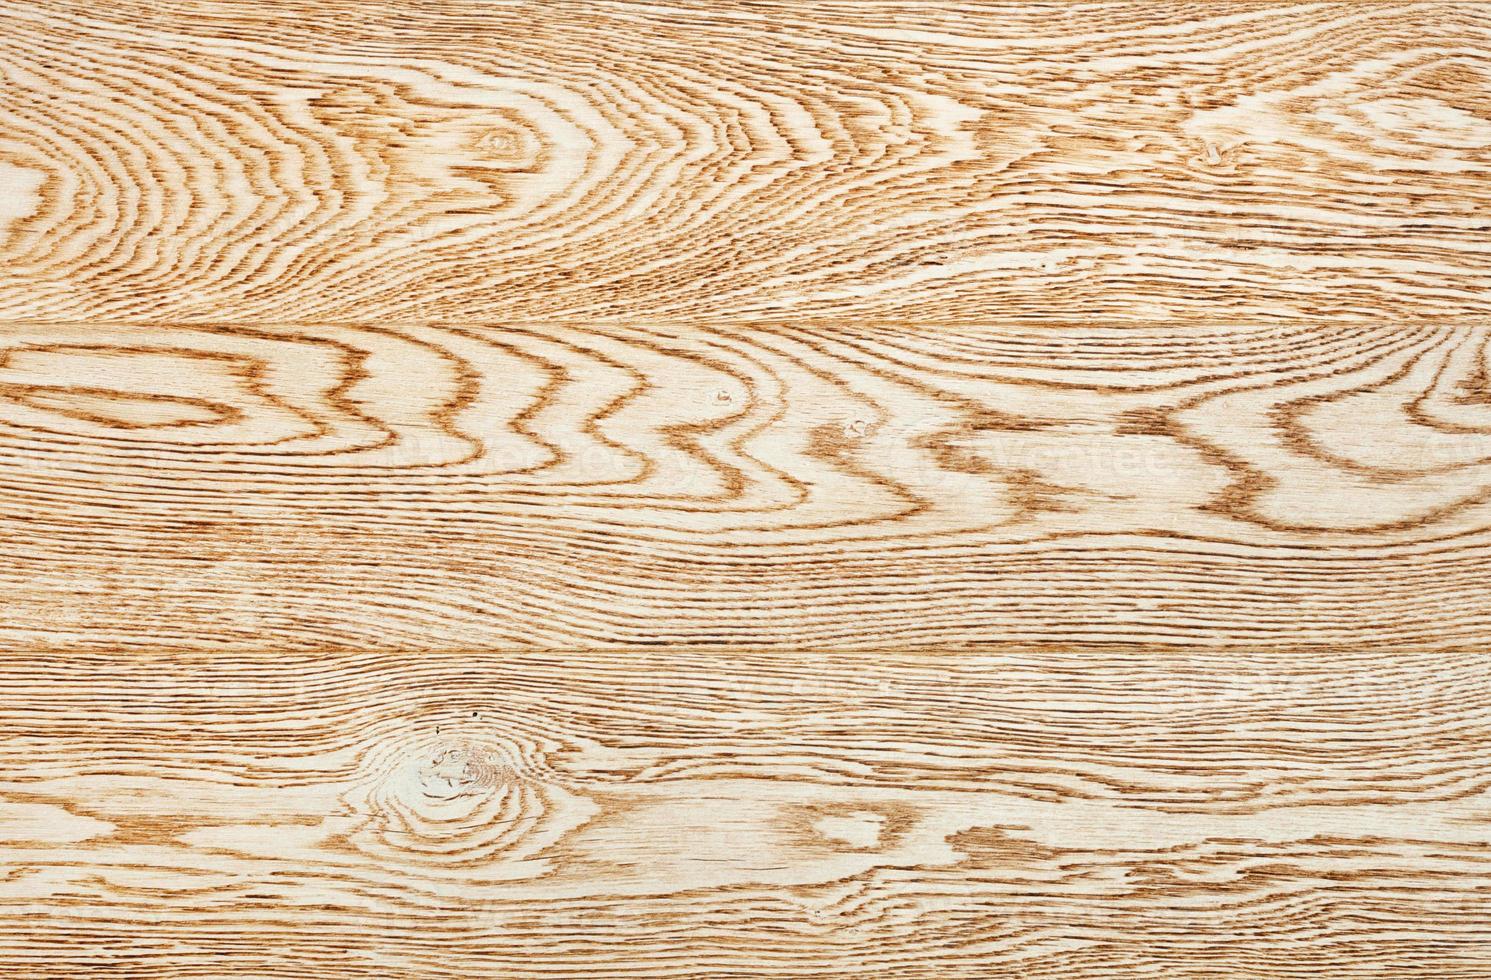 Beige wood surface texture with horizontal grains, close-up. photo